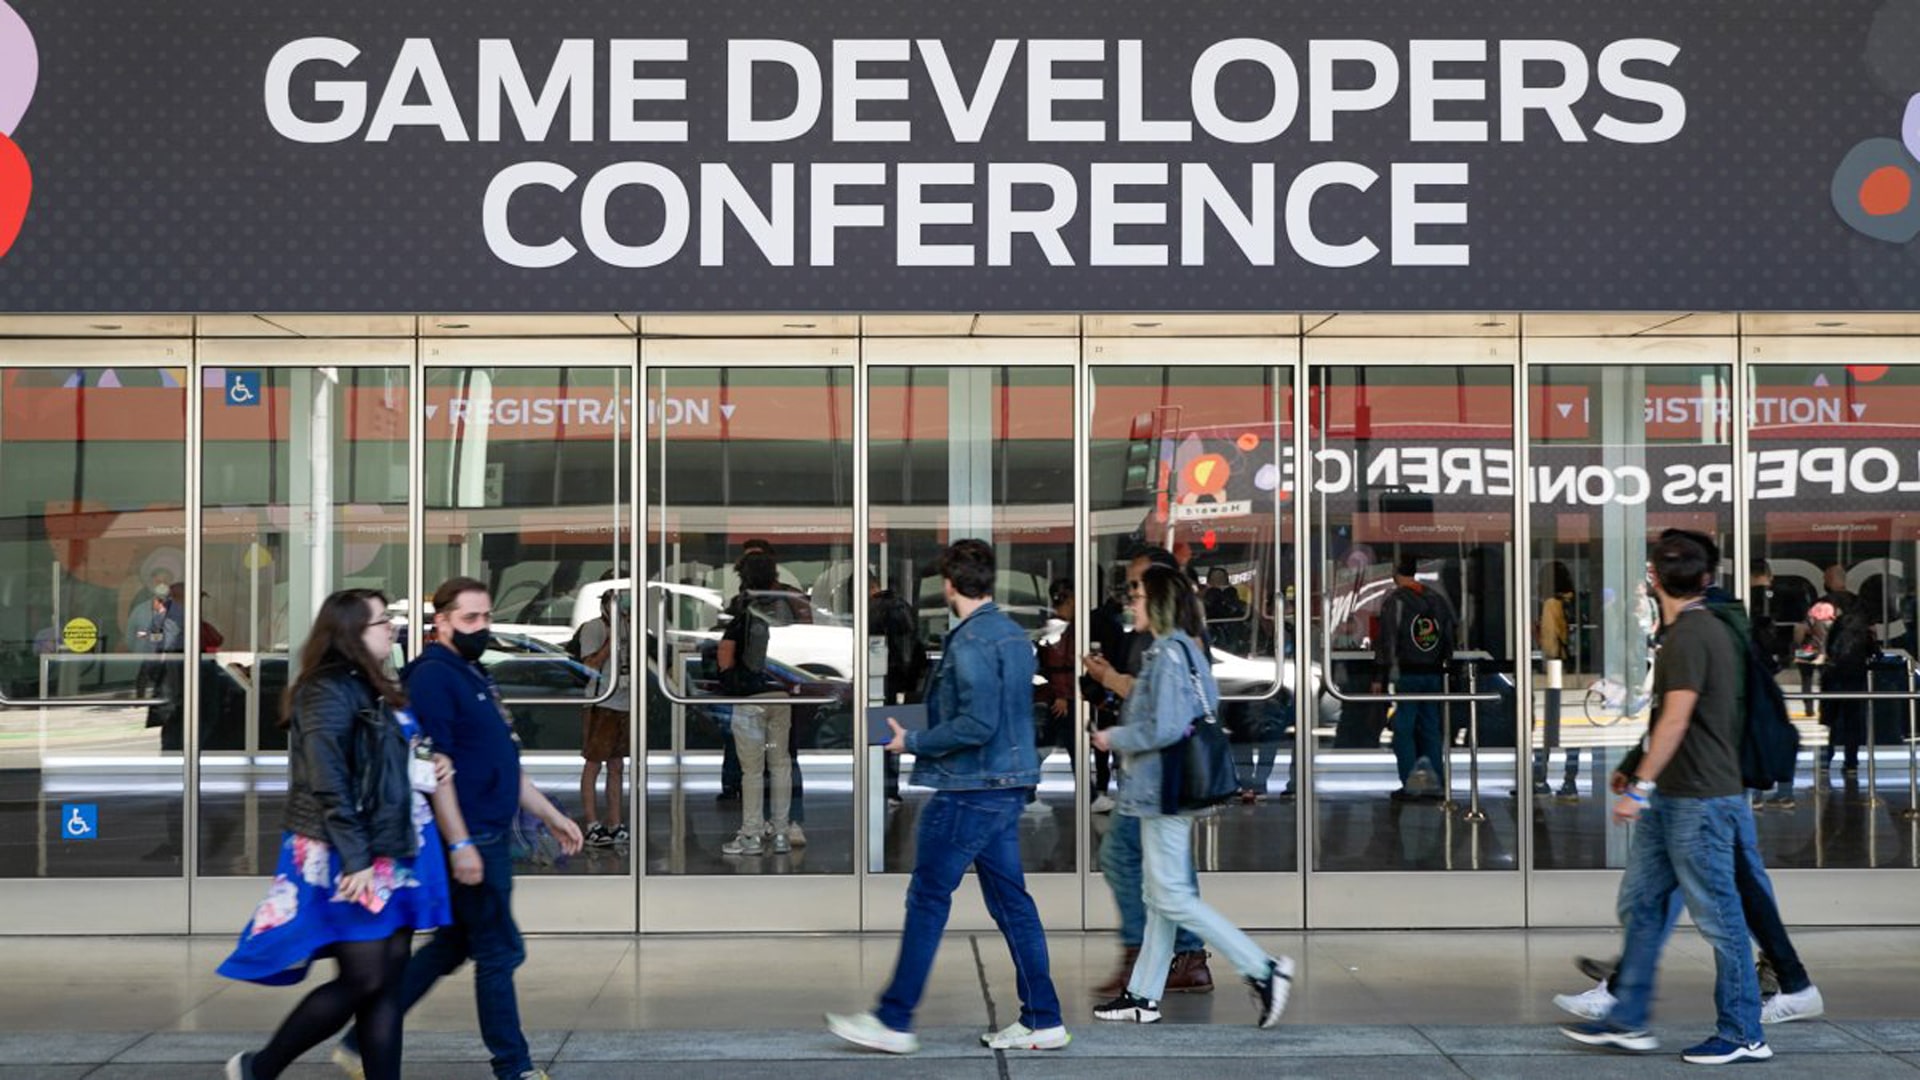 An image showcasing the latest GDC news in the world of game development